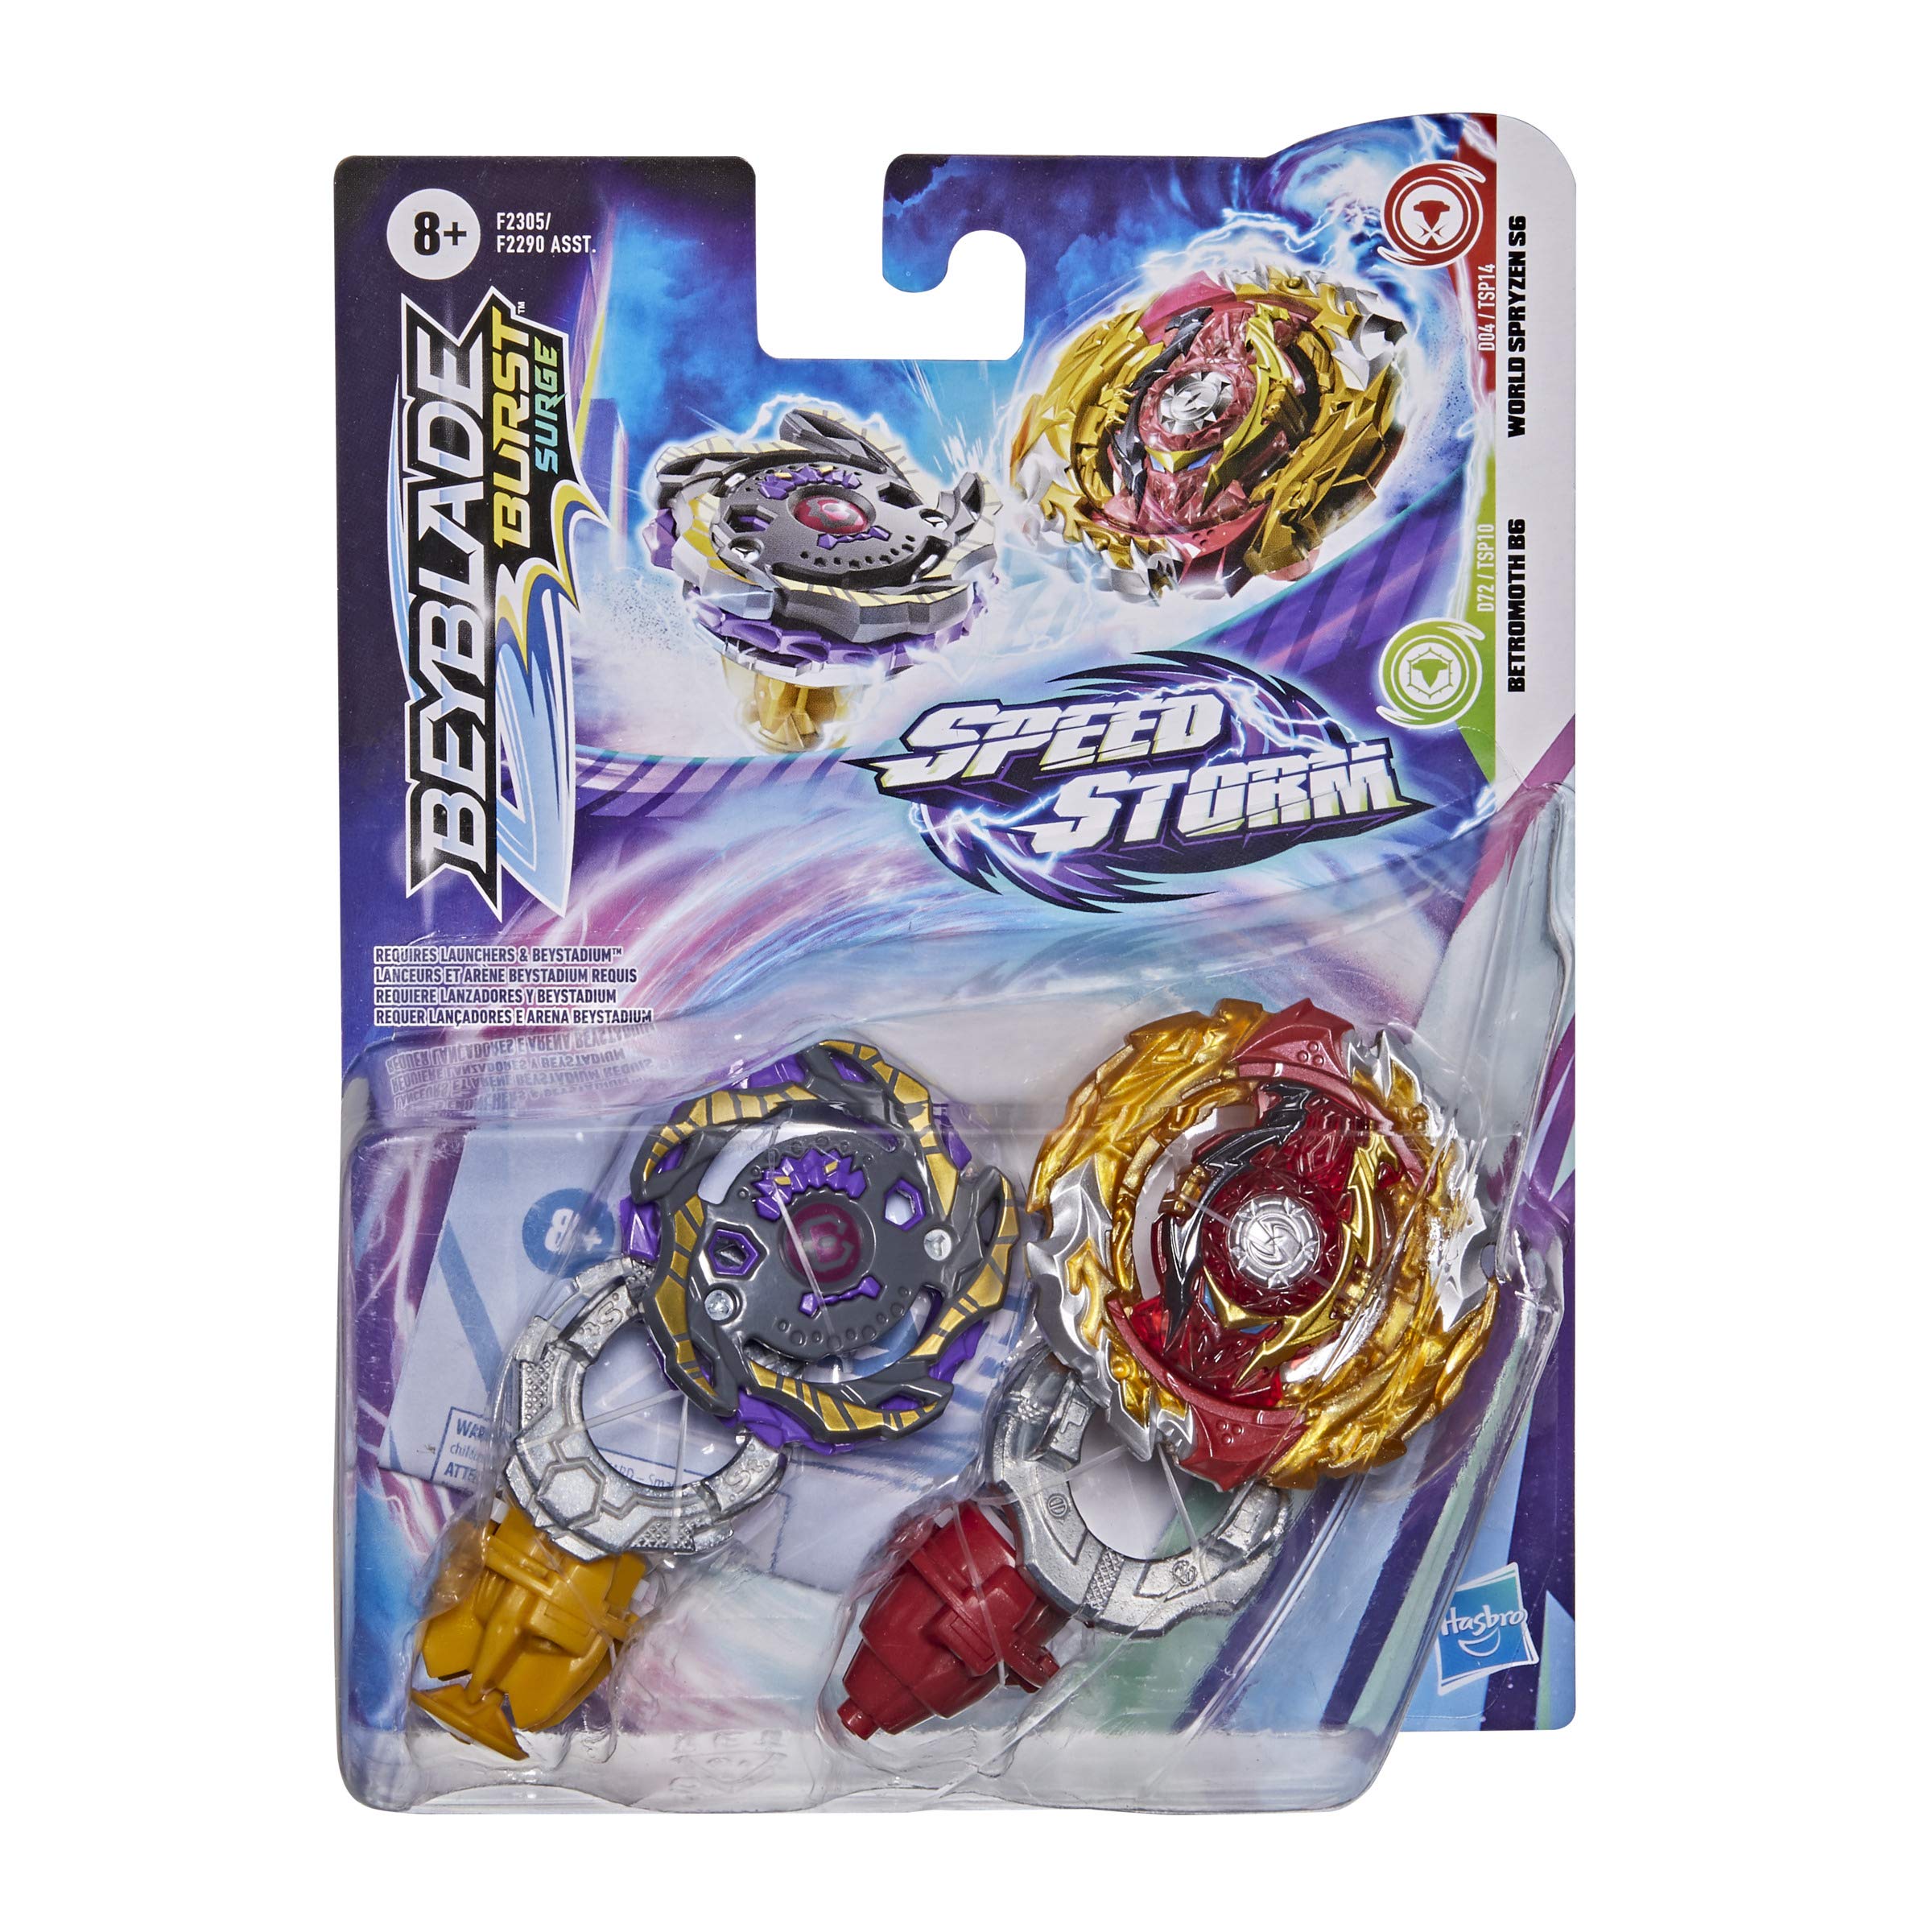 BEYBLADE Burst Surge Speedstorm World Spryzen S6 and Betromoth B6 Spinning Top Dual Pack - 2 Battling Game Top Toy for Kids Ages 8 and Up